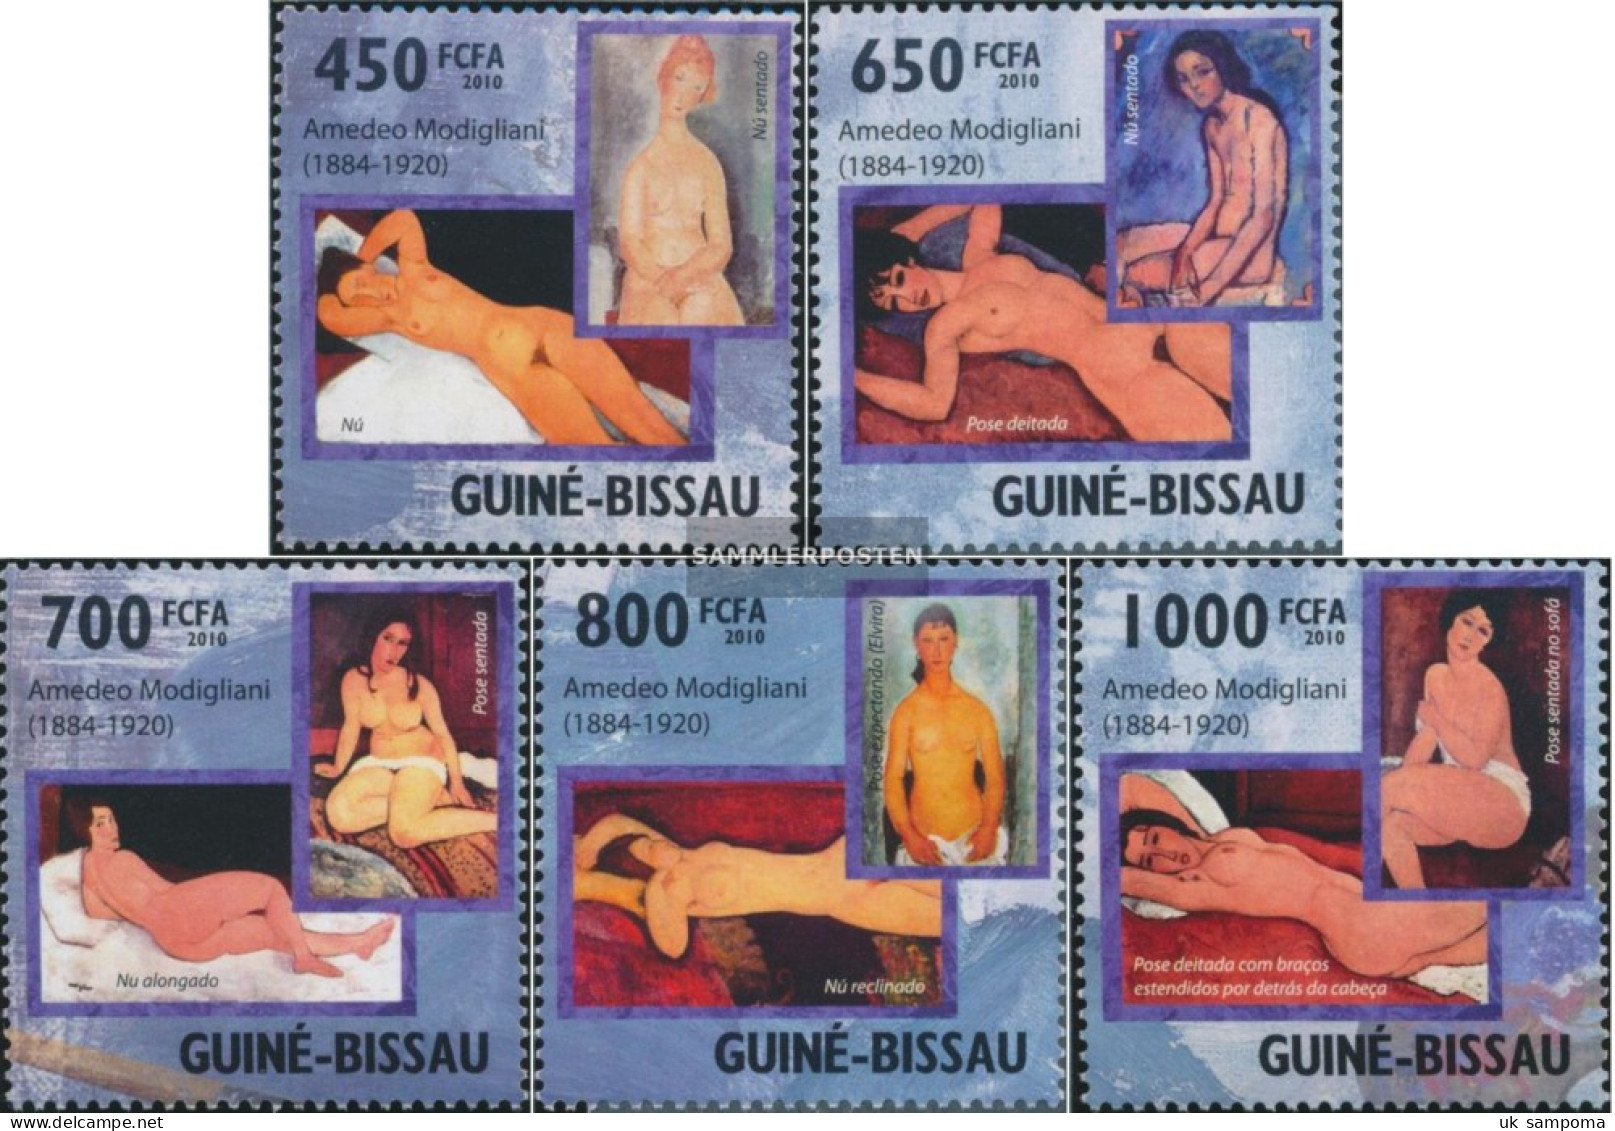 Guinea-Bissau 4605-4609 (complete. Issue) Unmounted Mint / Never Hinged 2010 Amedeo Modigliani - Guinea-Bissau